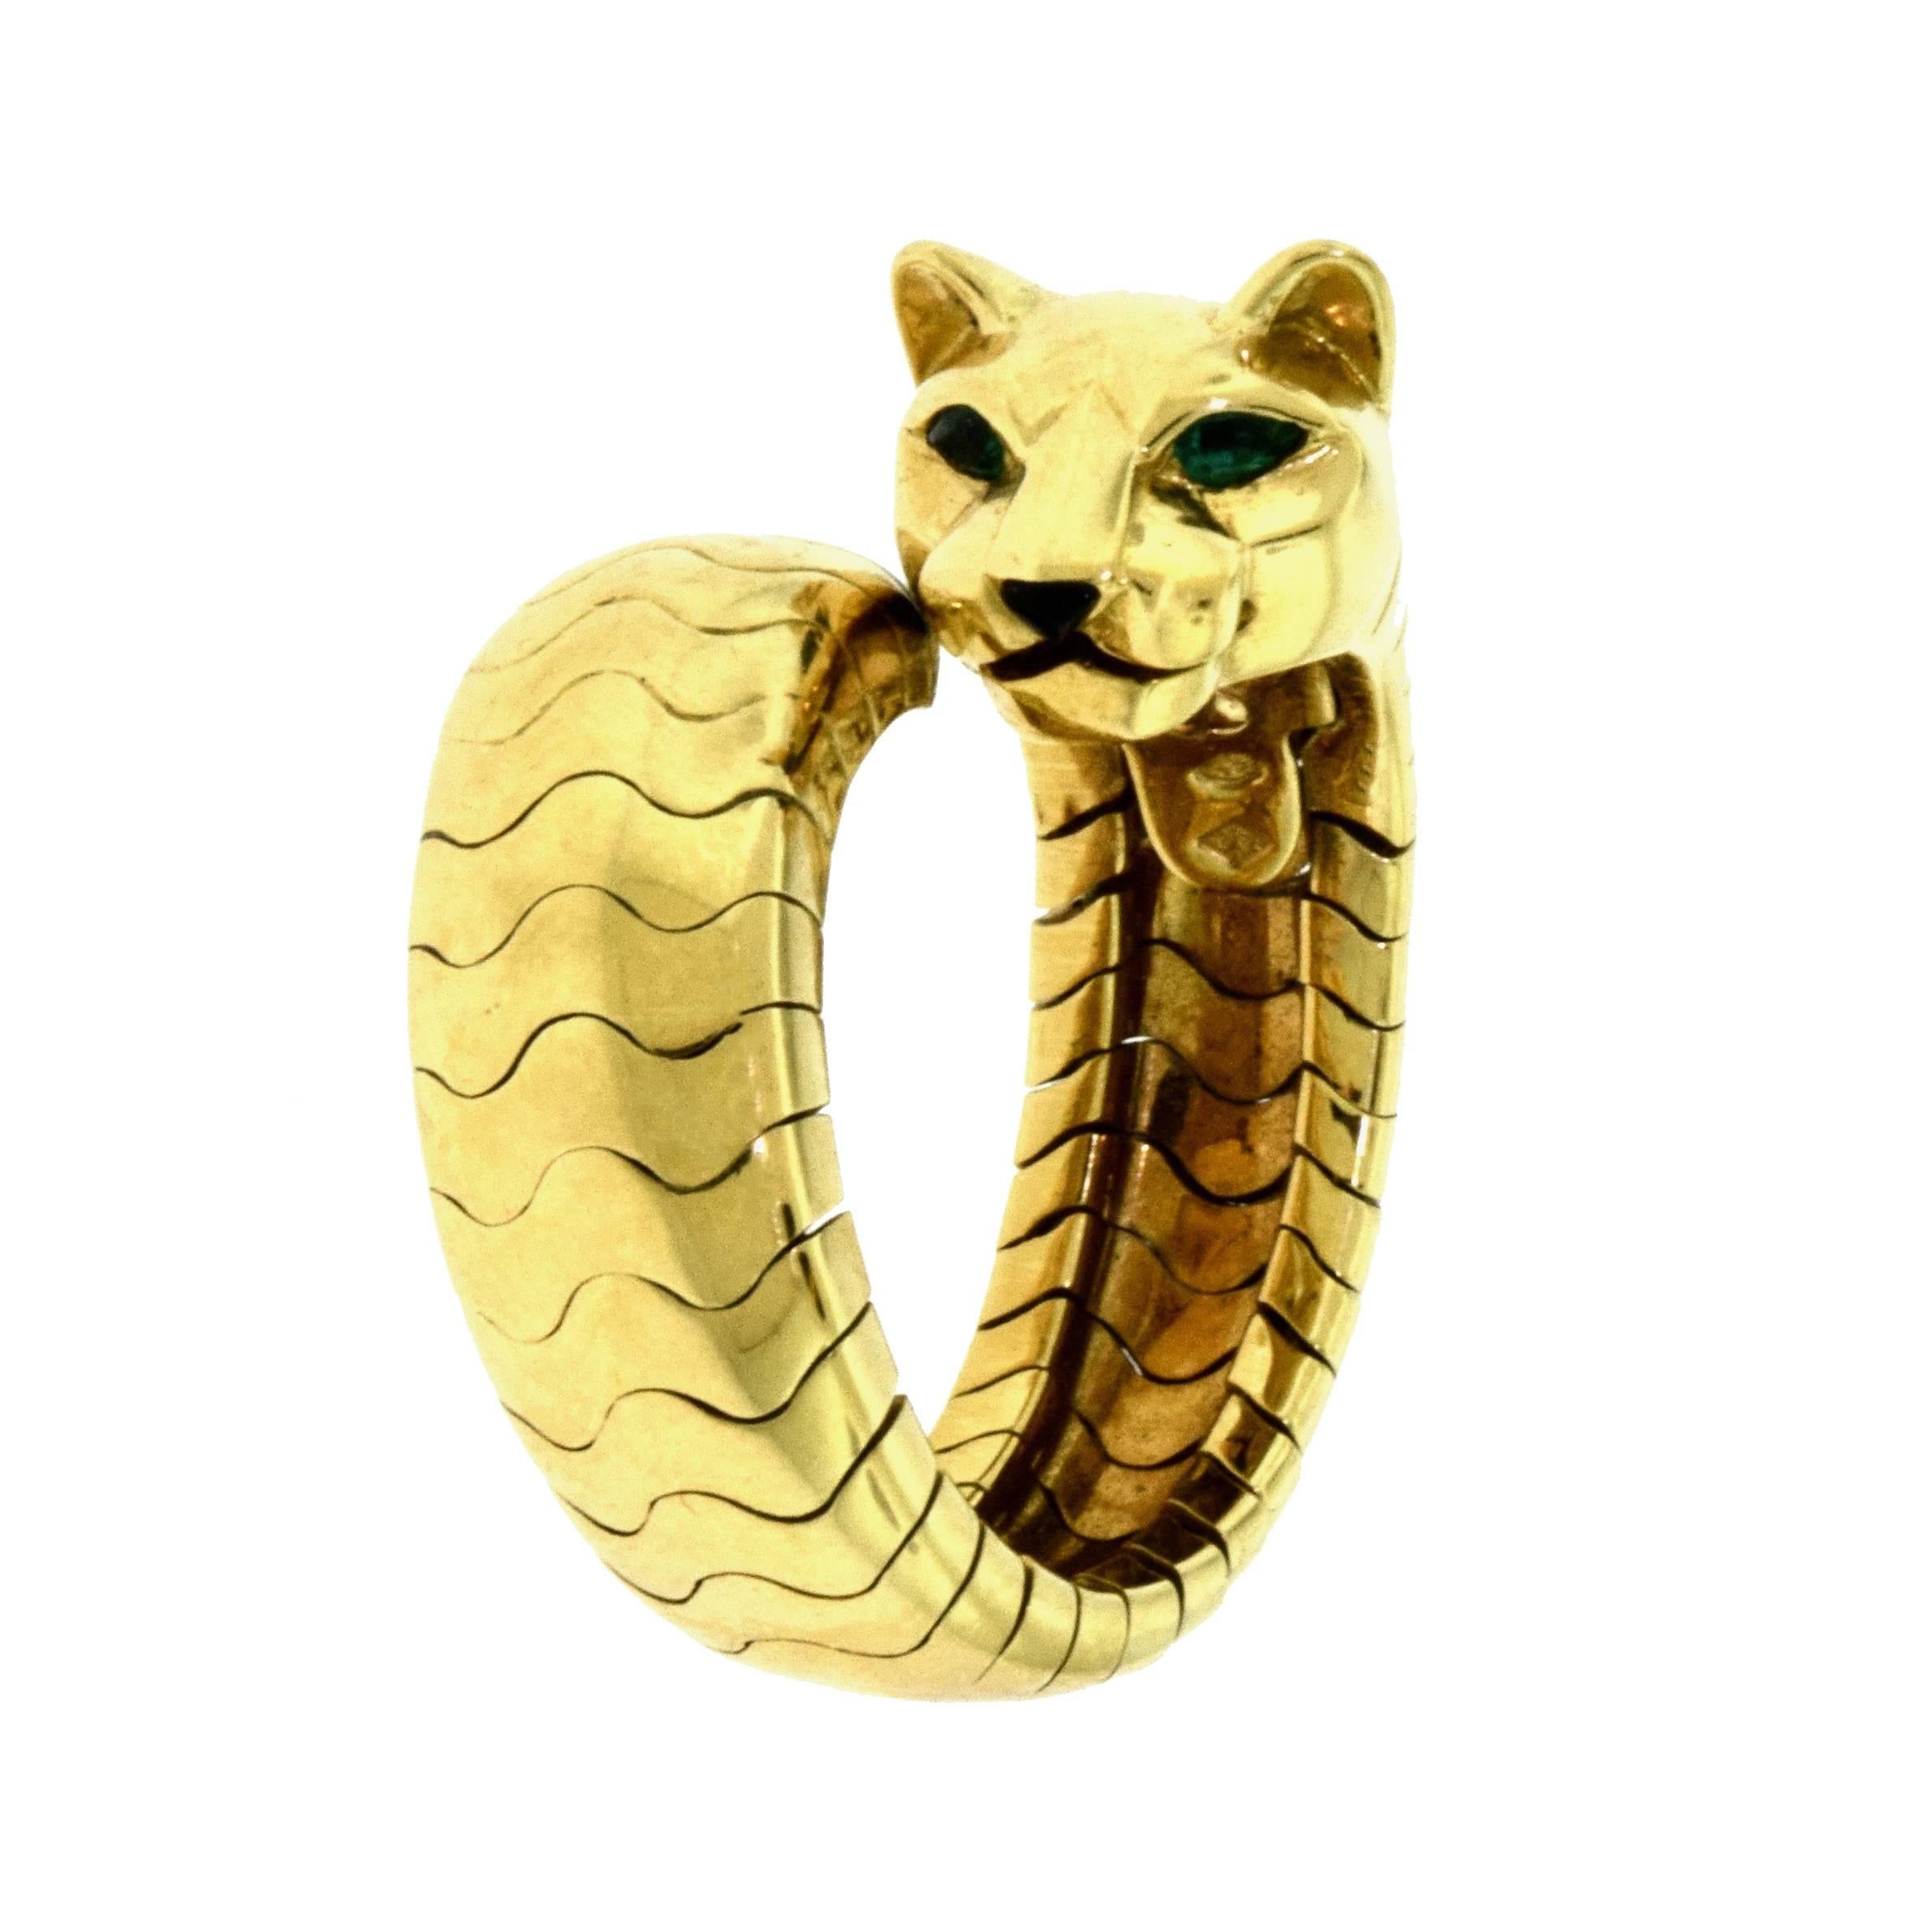 Ring Size: adjustable from 6.5 - 9
Designer: Cartier
Collection: Panthere de Cartier
Metal: Yellow Gold
Metal Purity: 18k
Stones: Tsavorite Garnets, Onyx
Total Item Weight (g): 20.4
Panther Head Width: 10.73 mm
Band Width (at its smallest): 8.48